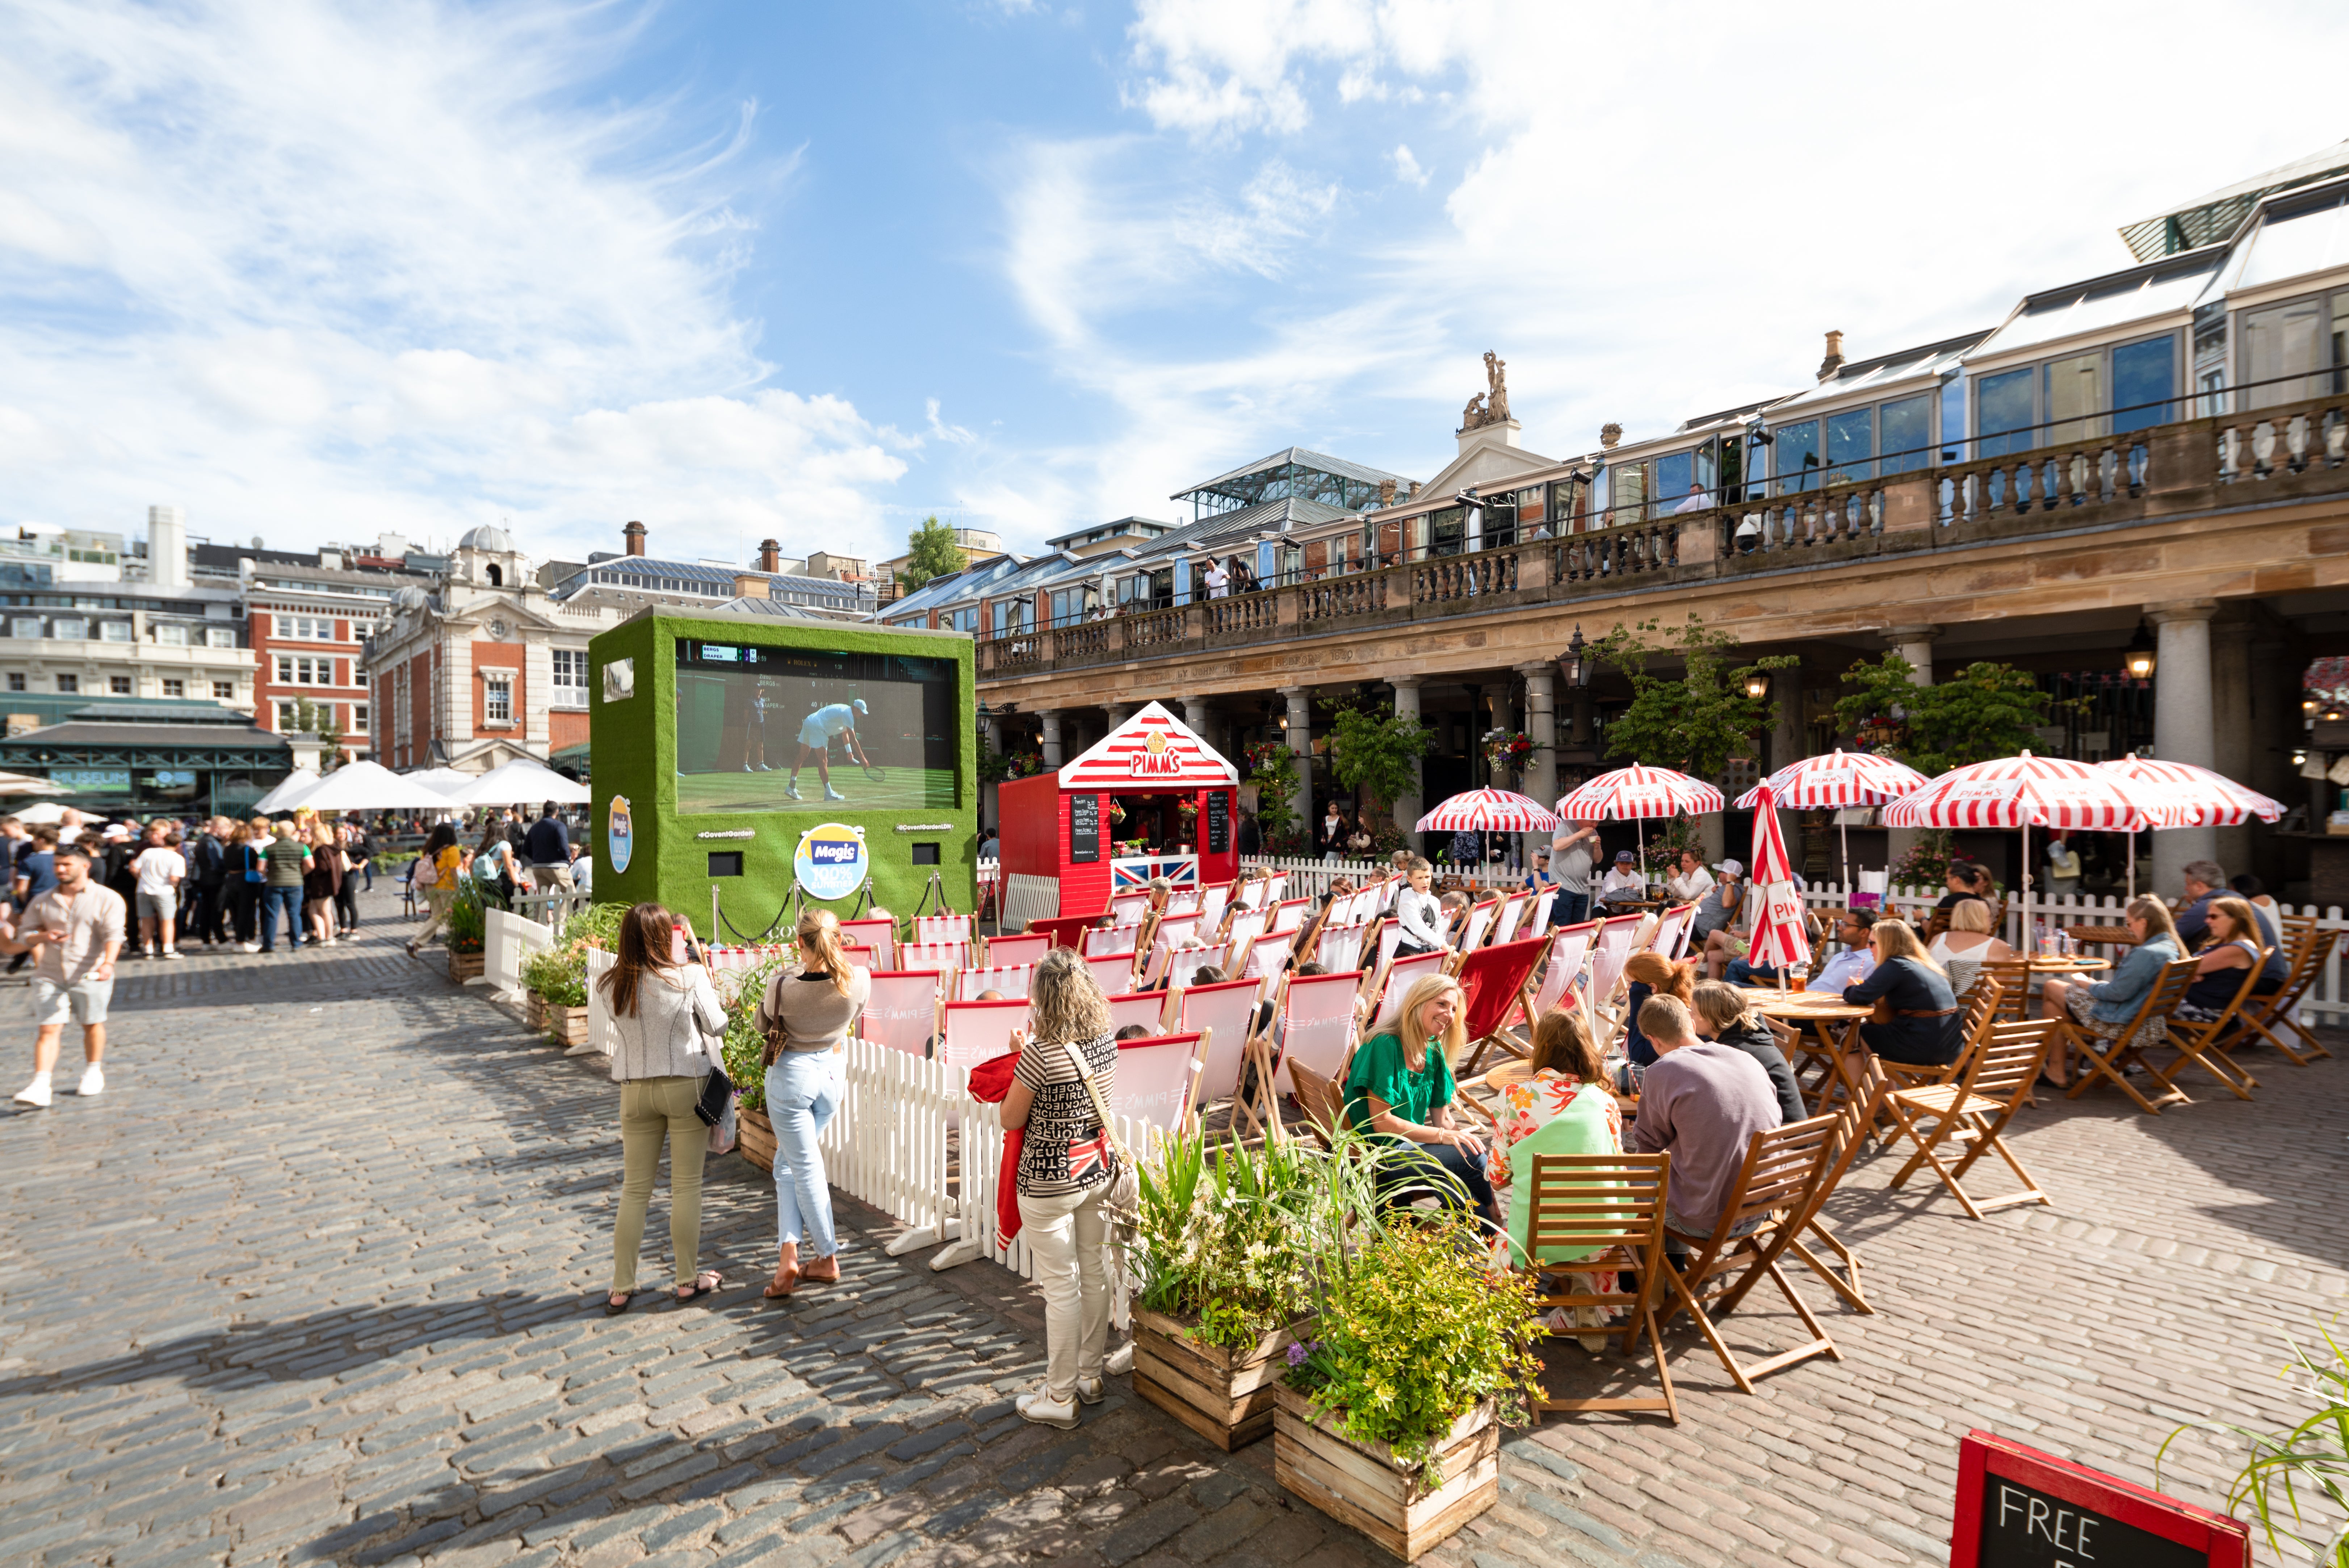 Covent Garden’s East Piazza has Pimms, parasols and strawberries